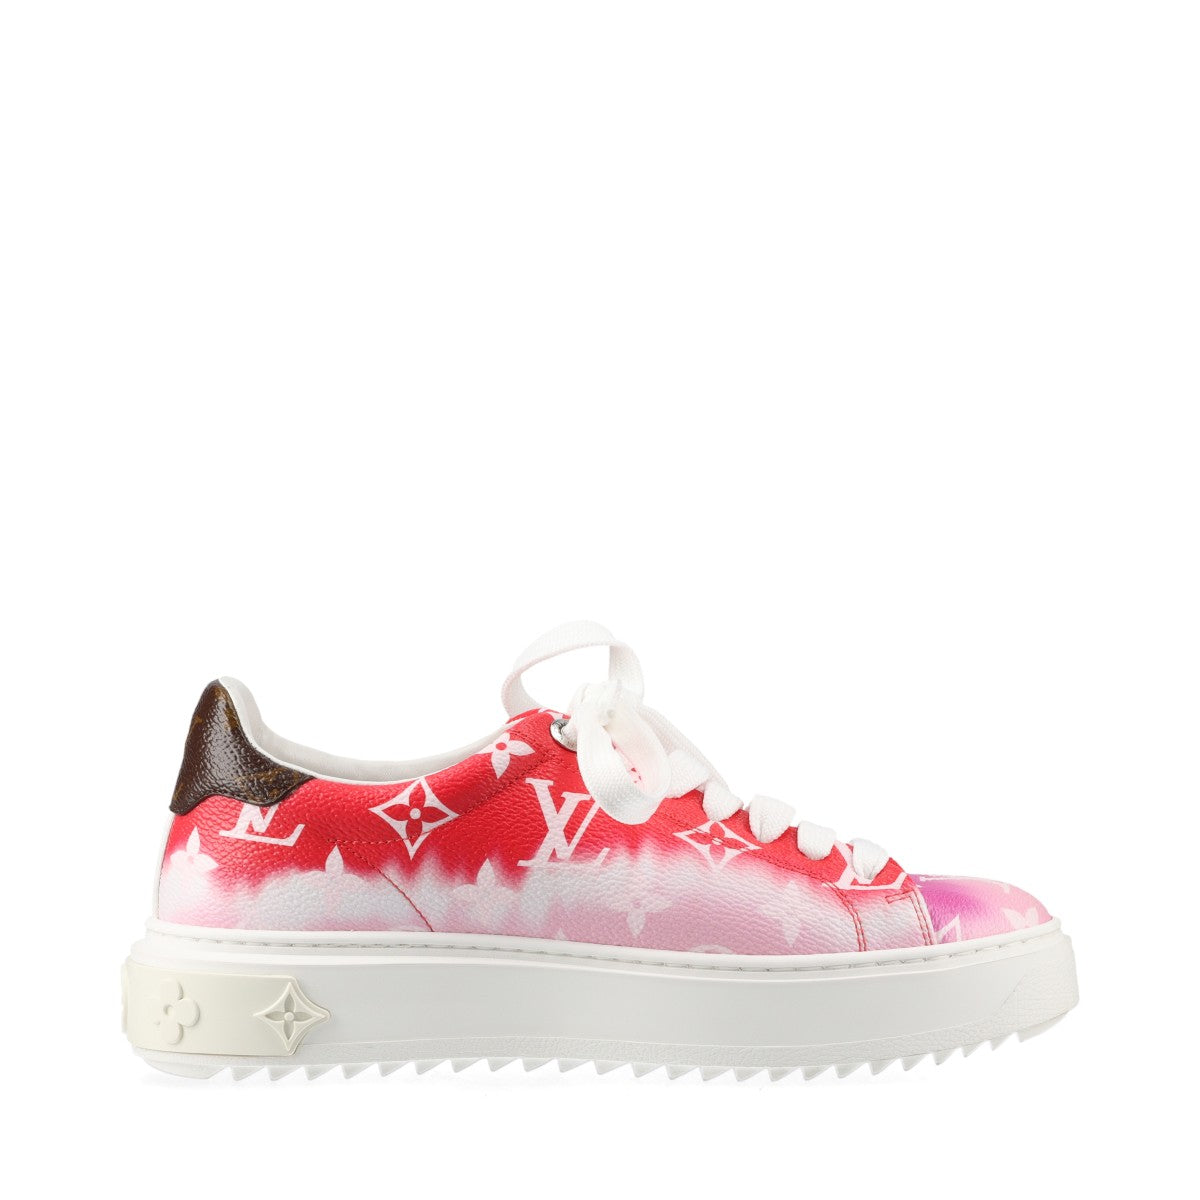 Louis Vuitton Time Outline 19 Years PVC  Leather Trainers 35  Red × White CL1119 Monogram